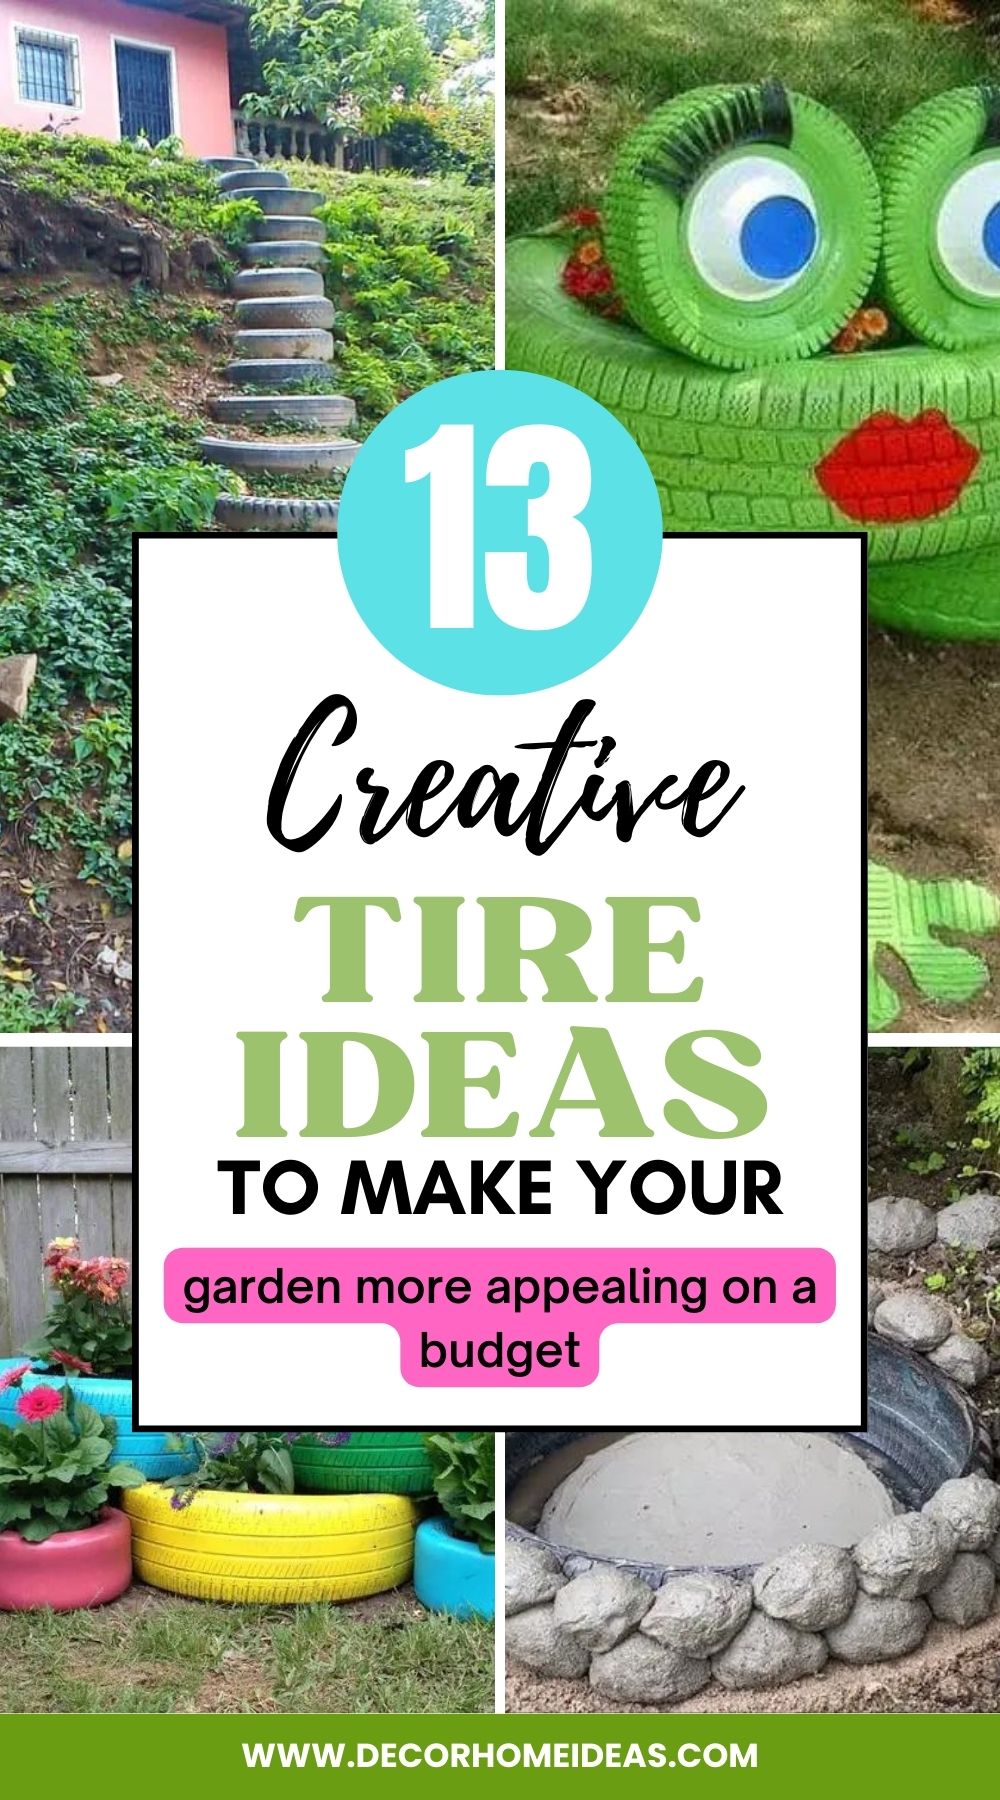 Get inspired to create a unique garden with these 13 interesting tire ideas. From planters to furniture, discover how to make the most of your outdoor space.